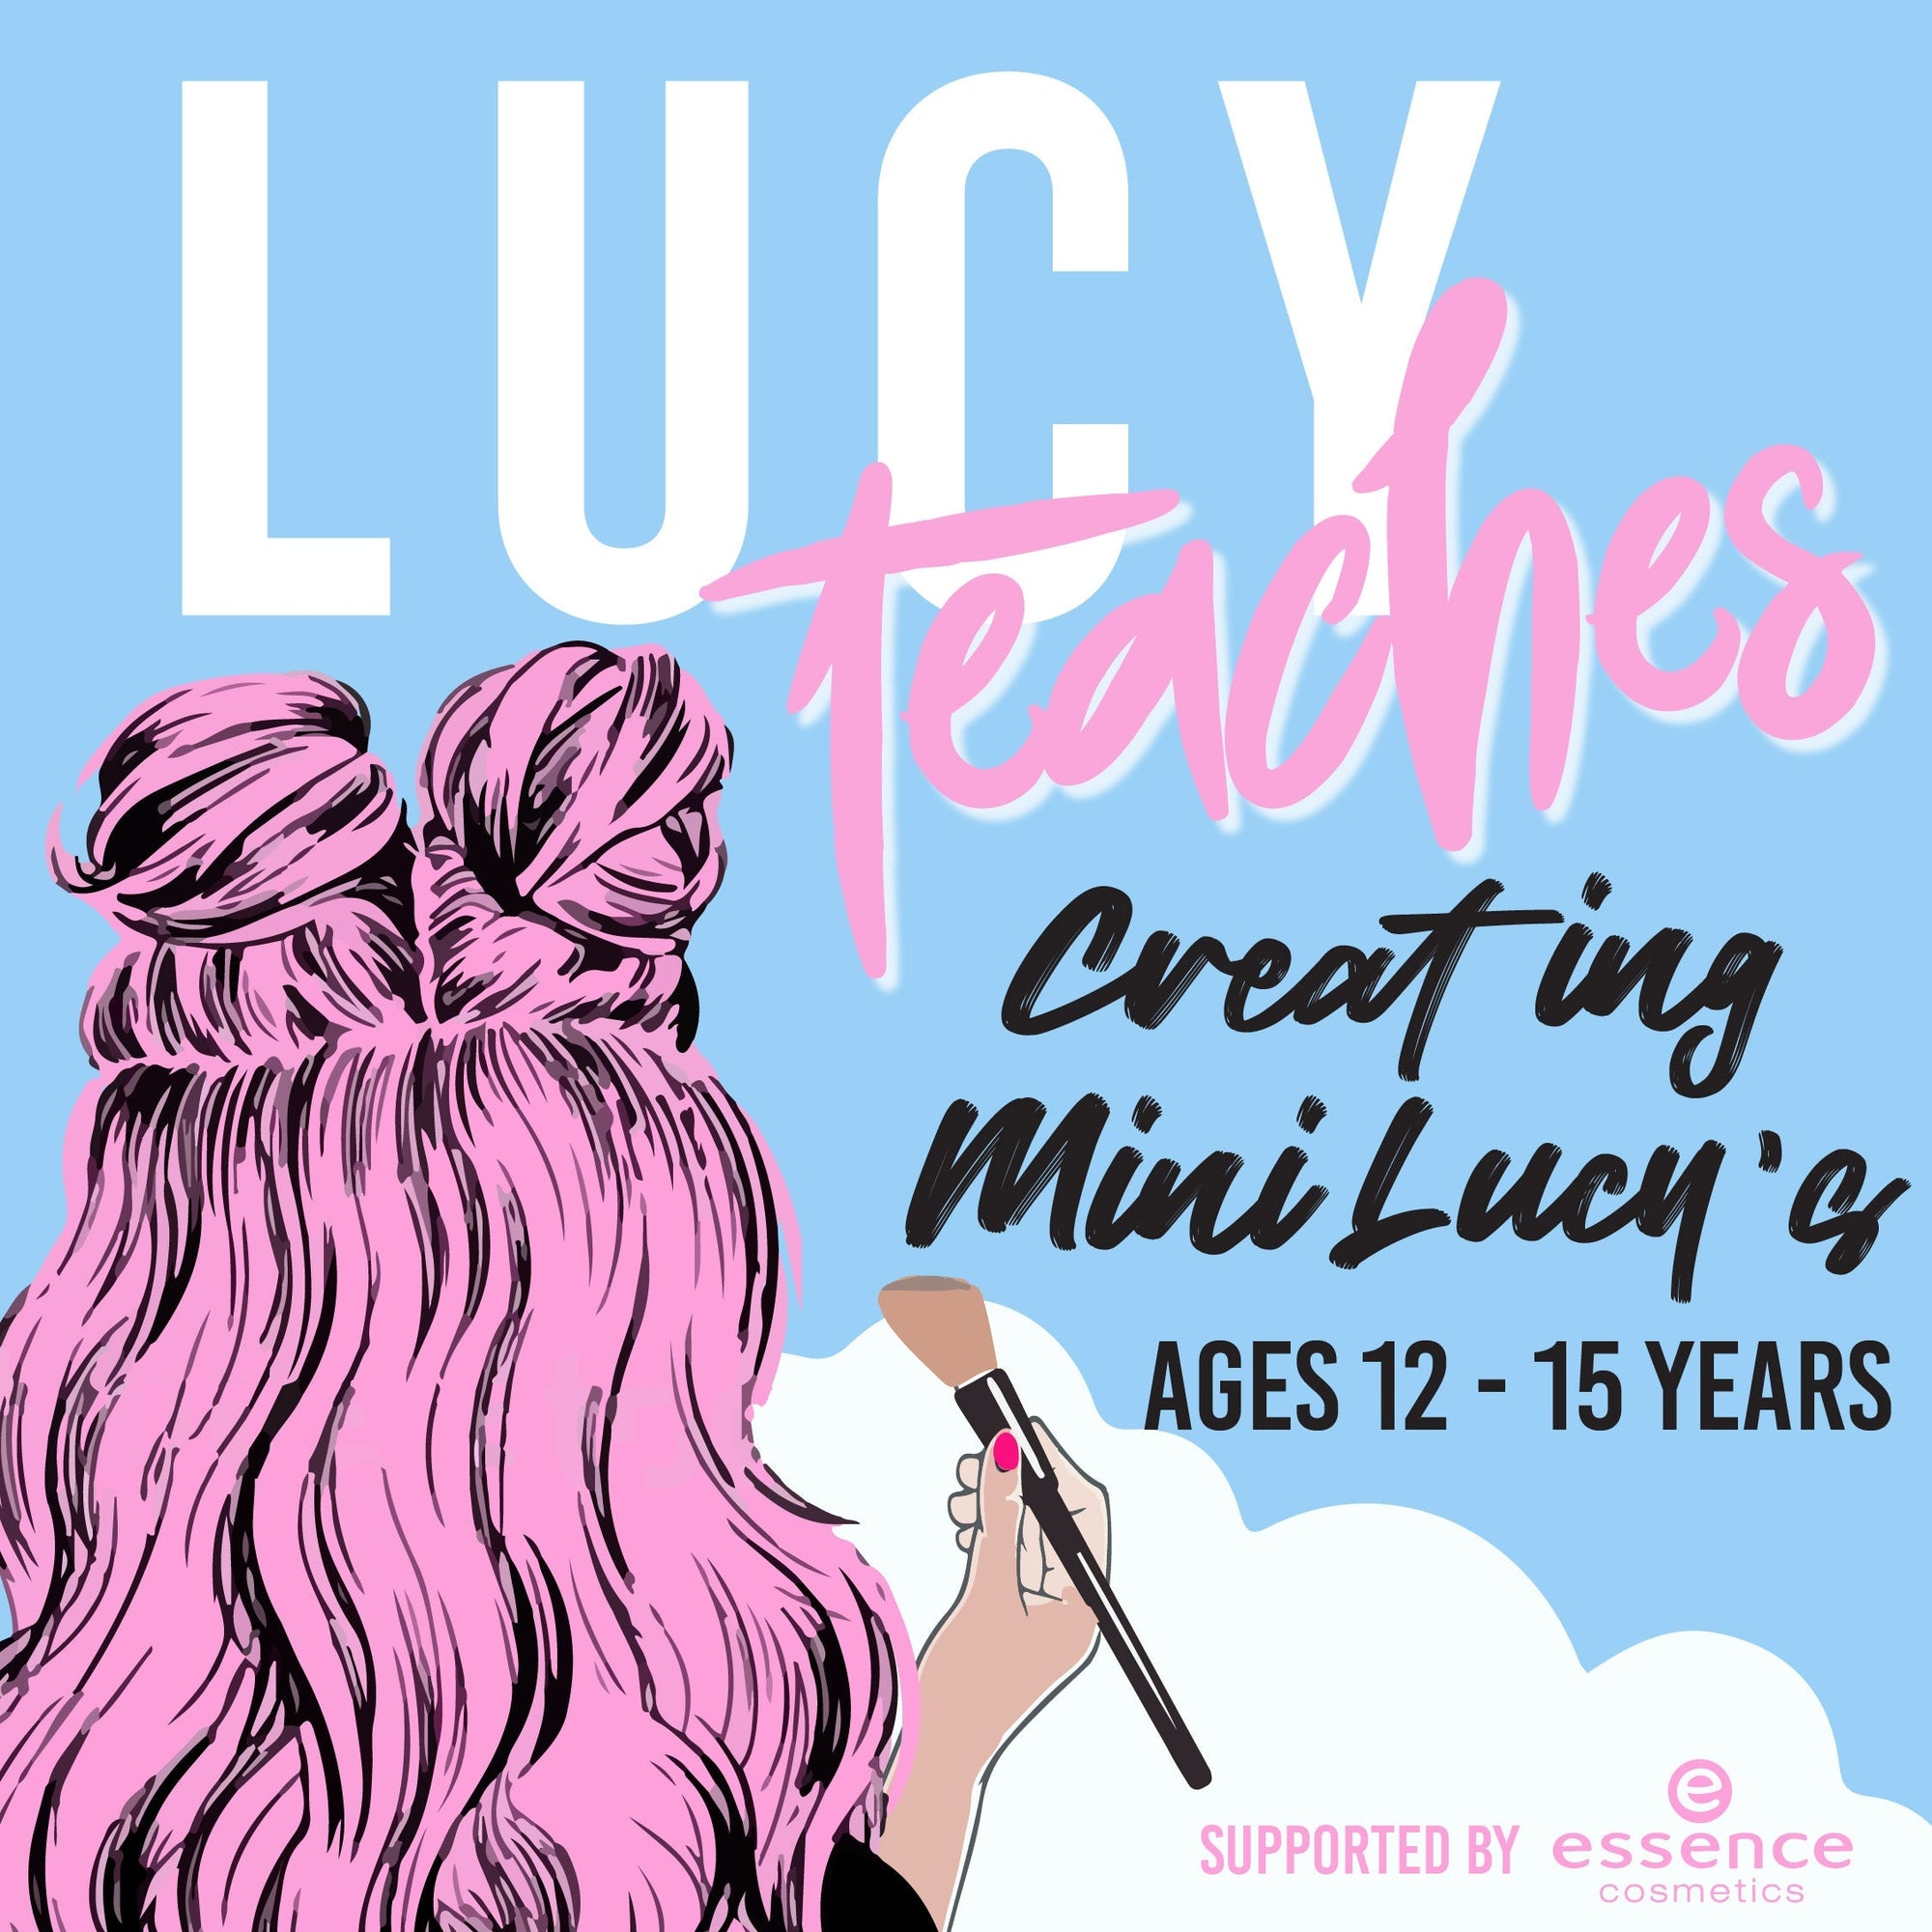 Lucy Teaches: Children's Beauty Workshop for Beginners (Teens - 12-15 Years Old) | May